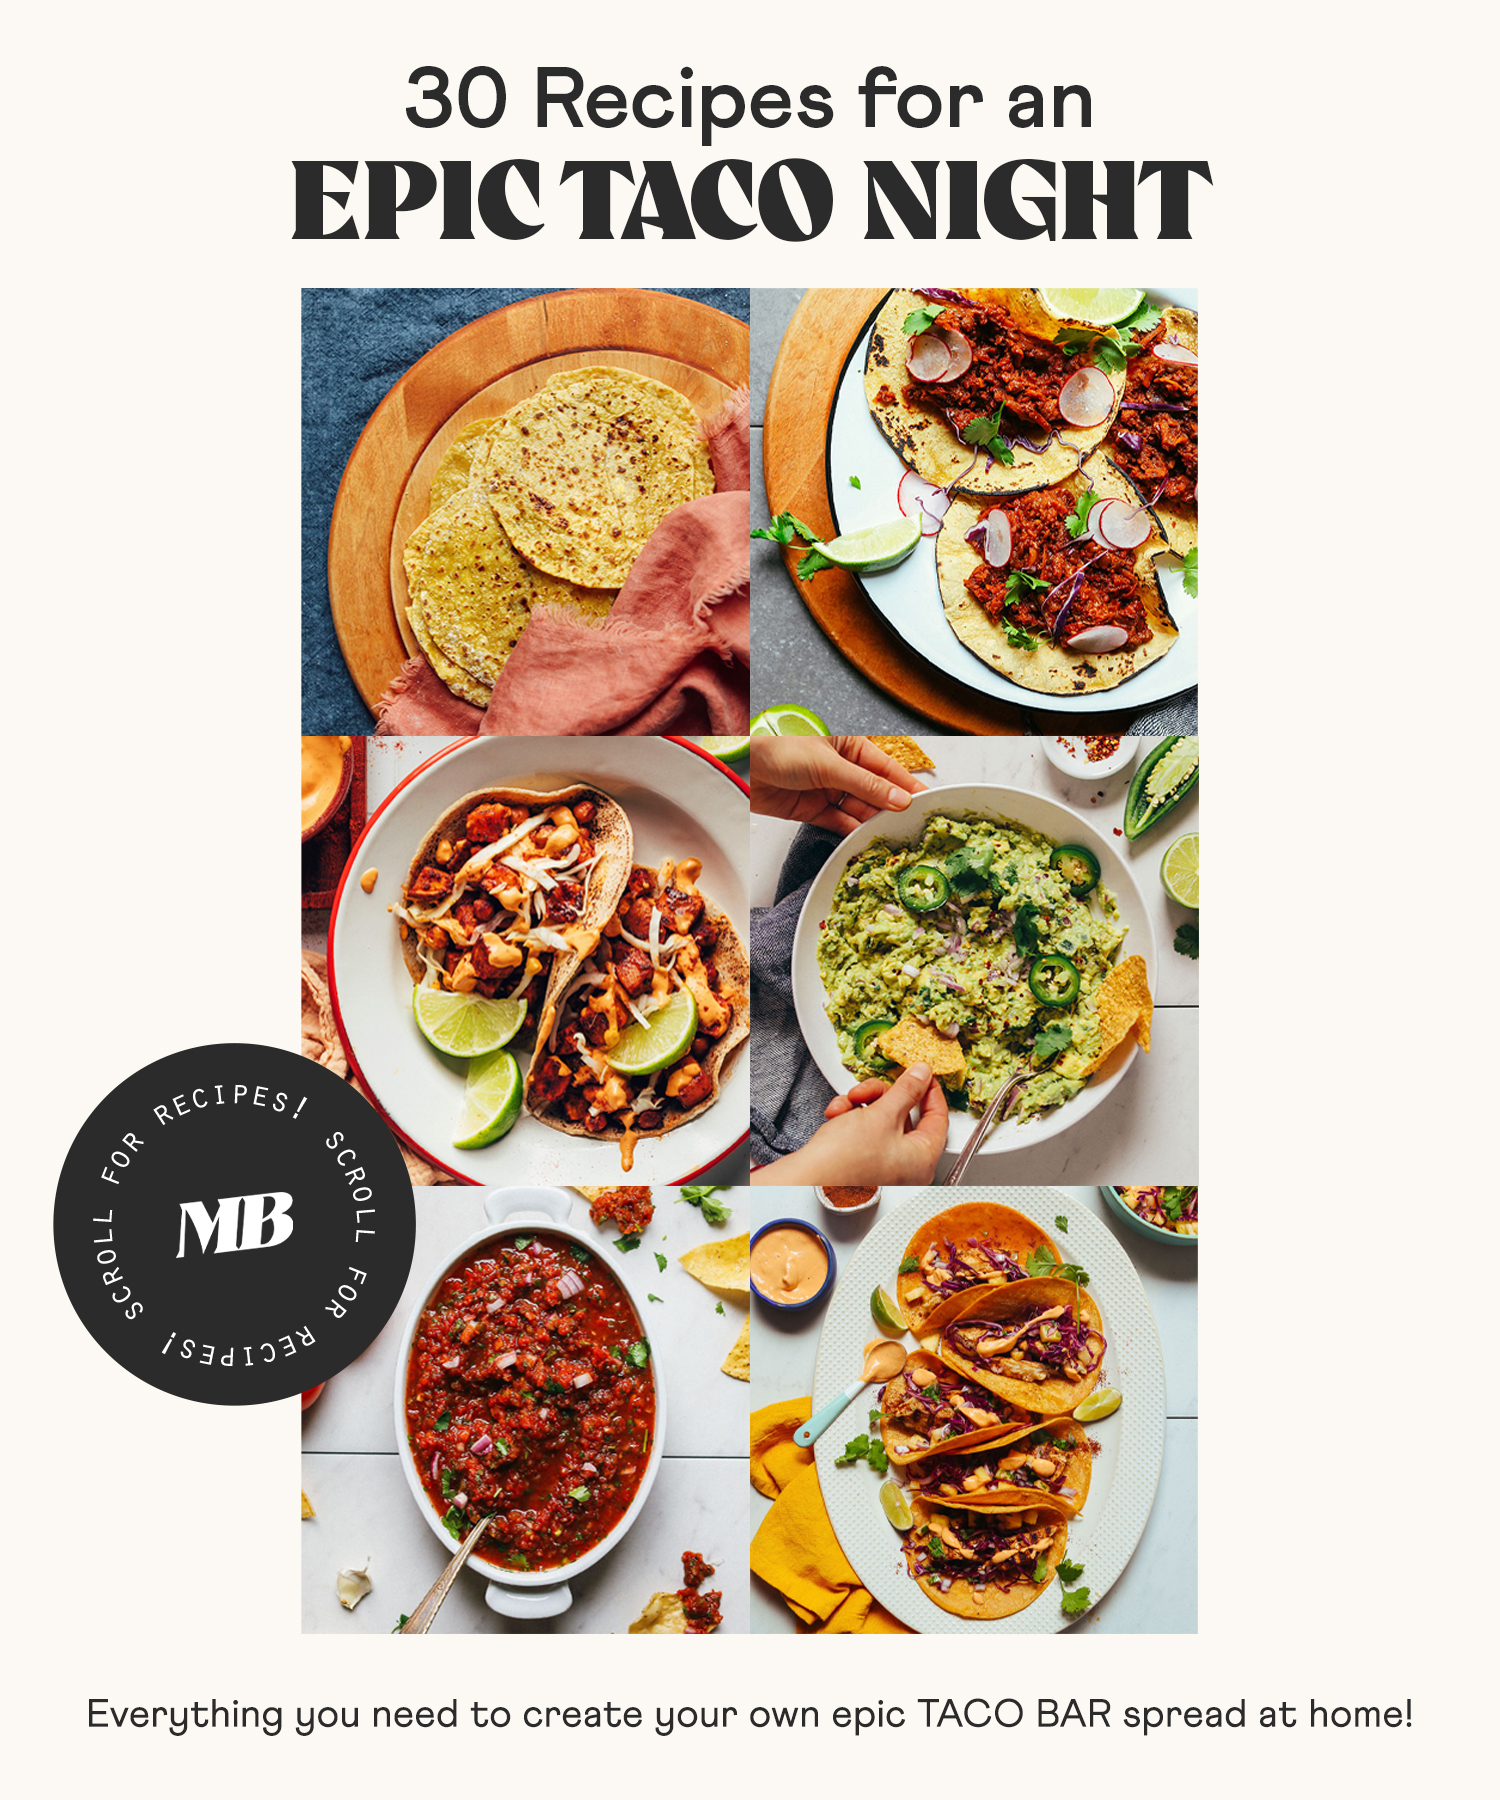 Photos of tortillas, sauces, and taco fillings for our round-up of recipes for throwing an epic taco night